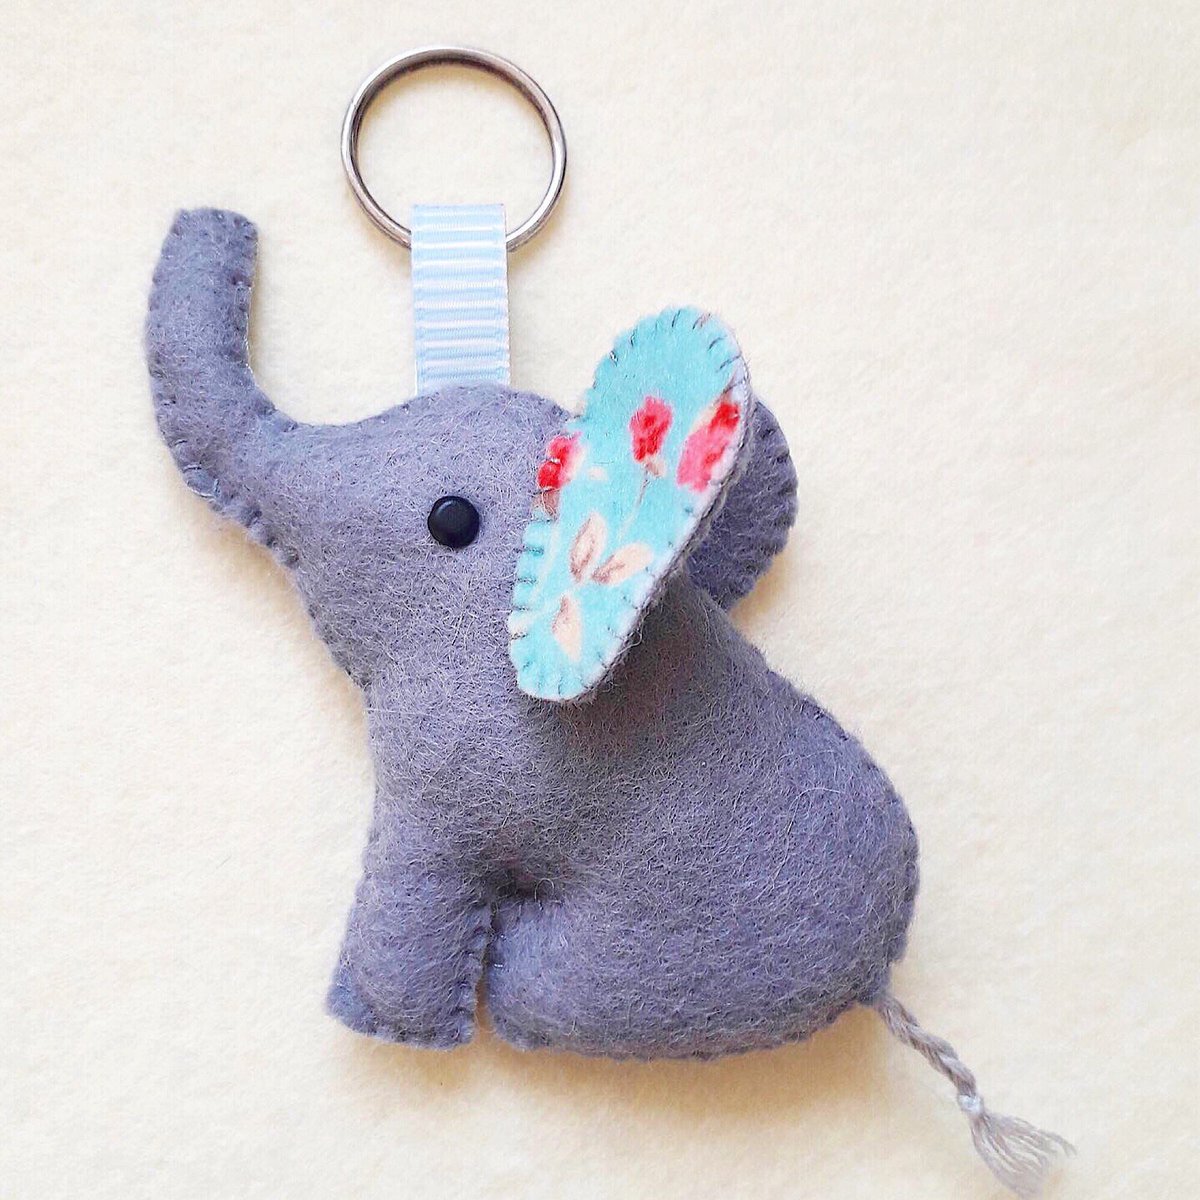 A cute felt elephant to sew. Can be made into hanging decorations and keyrings. #feltelephant #earlybiz #crafting #sewingpattern #etsy #MHHSBD 

sewjunejones.etsy.com/listing/698215…